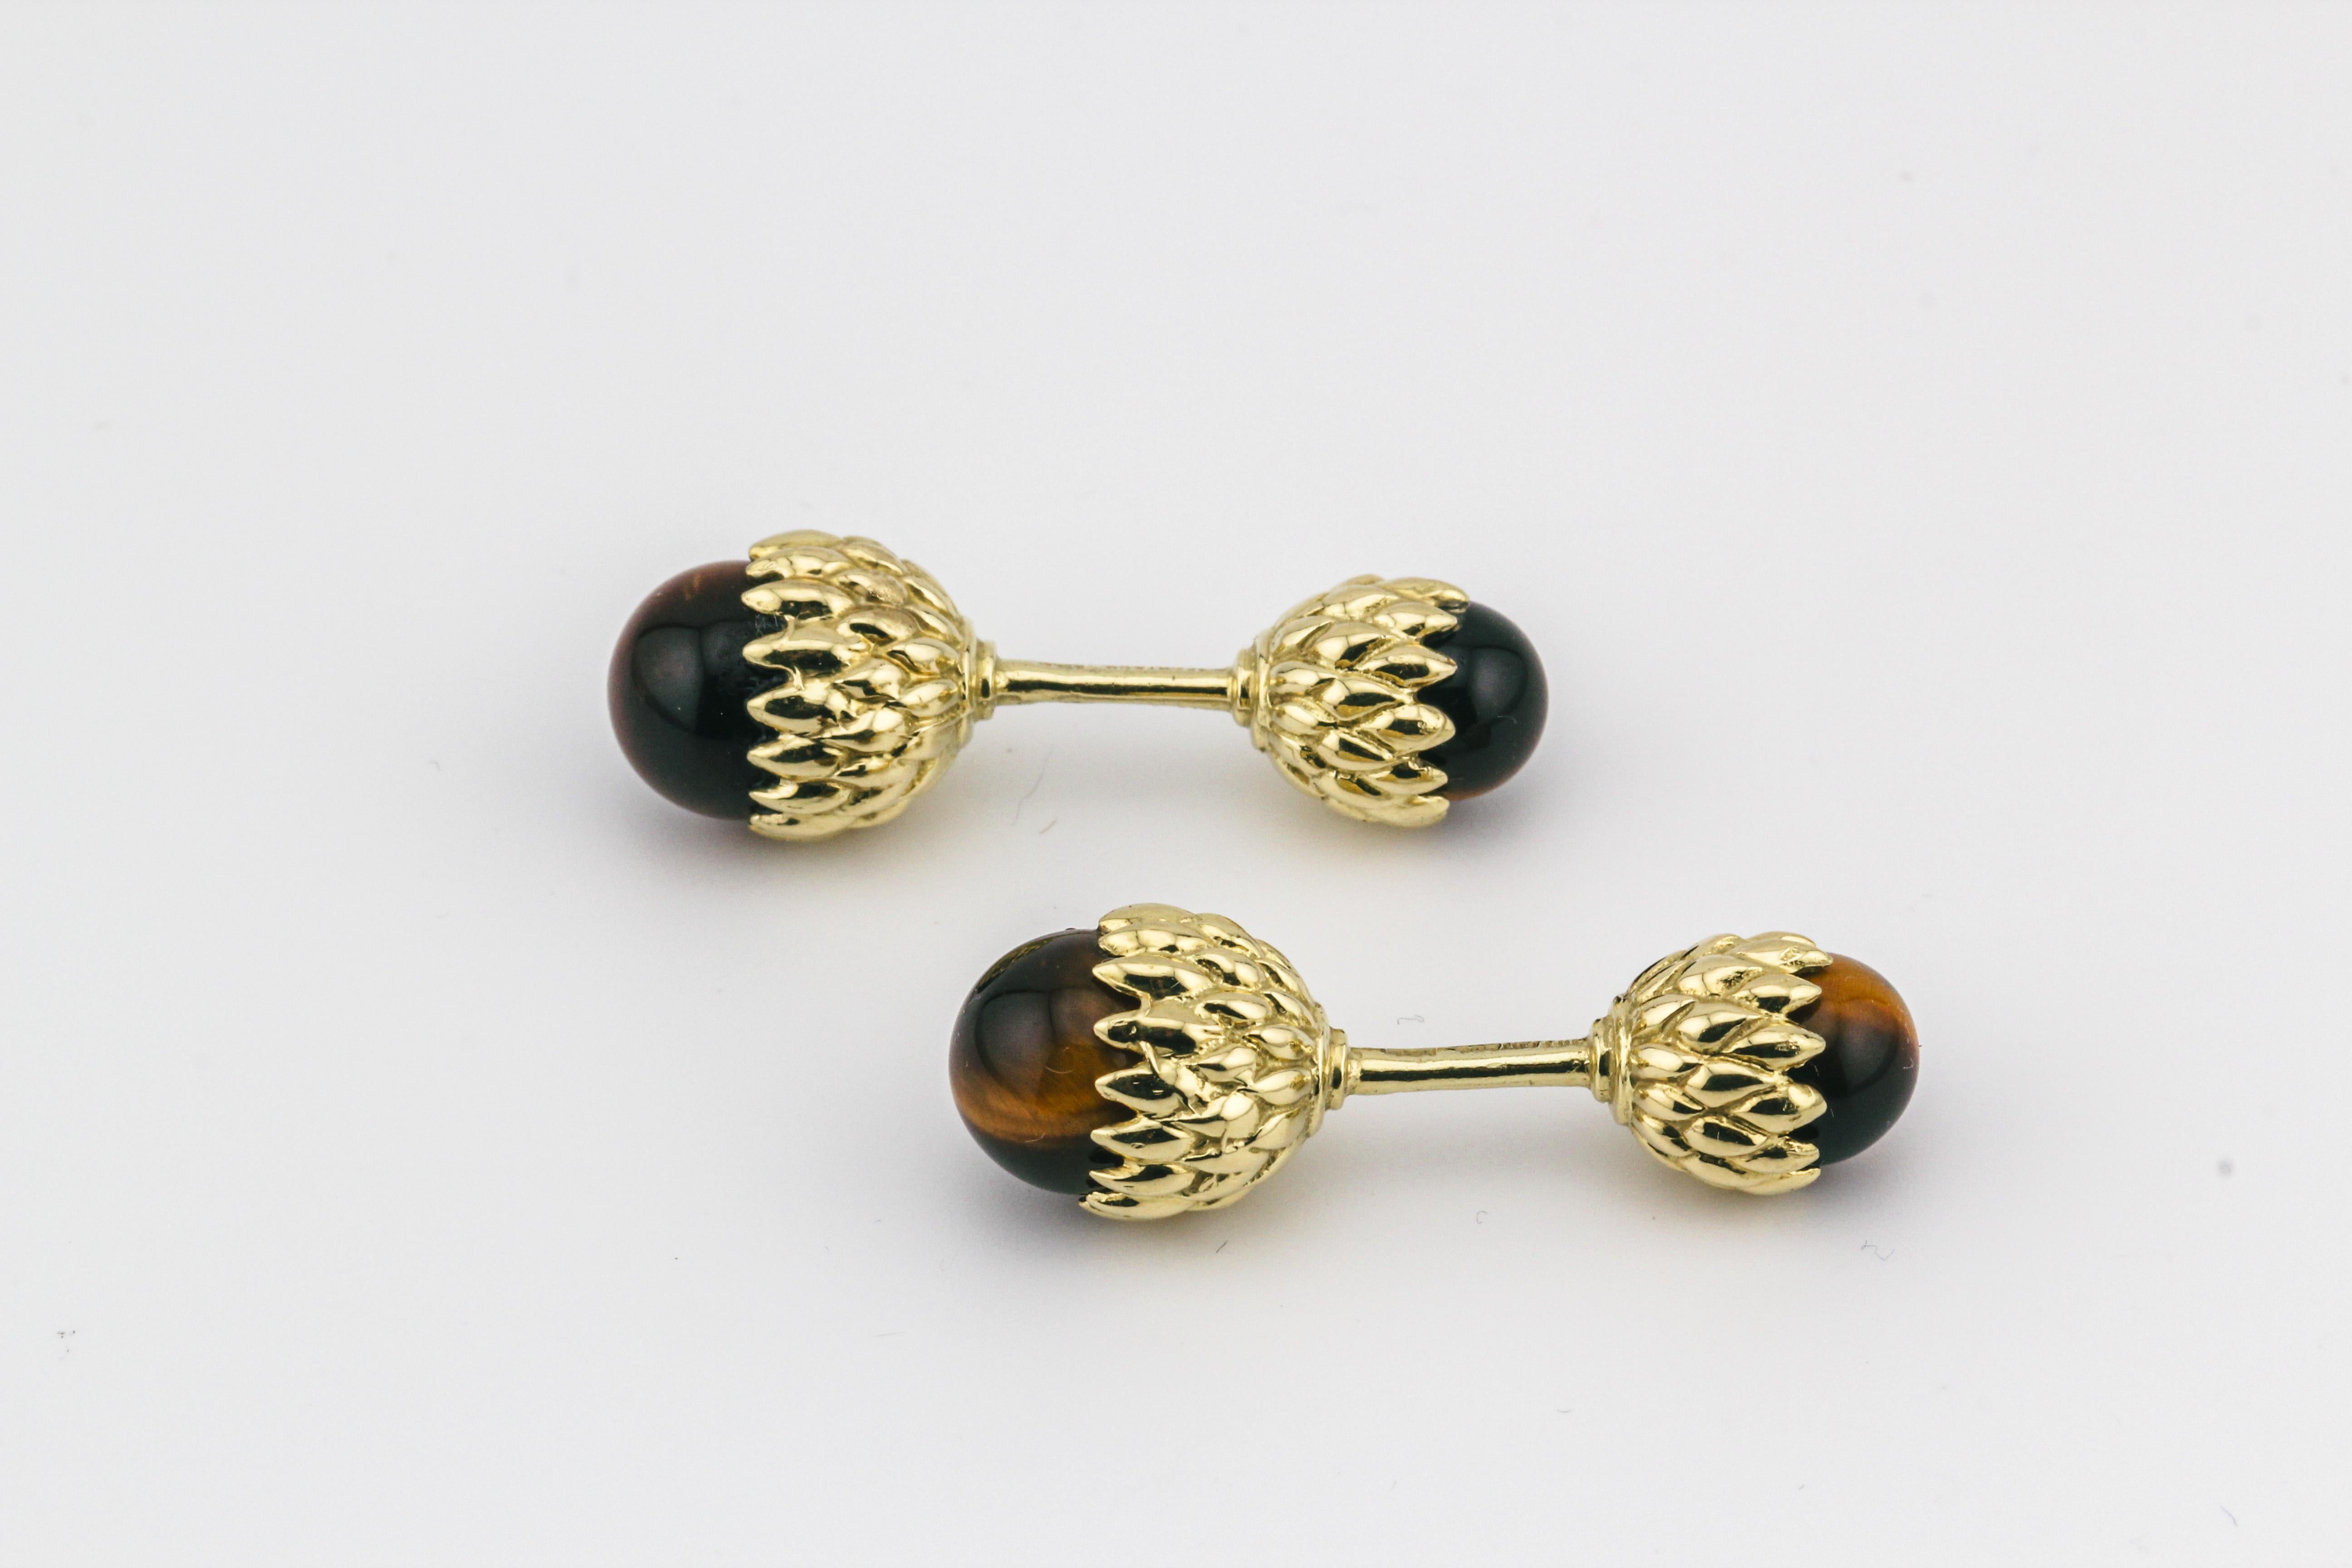 Immerse yourself in the world of opulence and distinctive style with the Tiffany & Co. Schlumberger Tiger's Eye 18K Yellow Gold Acorn Cufflinks. A harmonious blend of nature-inspired design and luxurious craftsmanship, these cufflinks stand as a